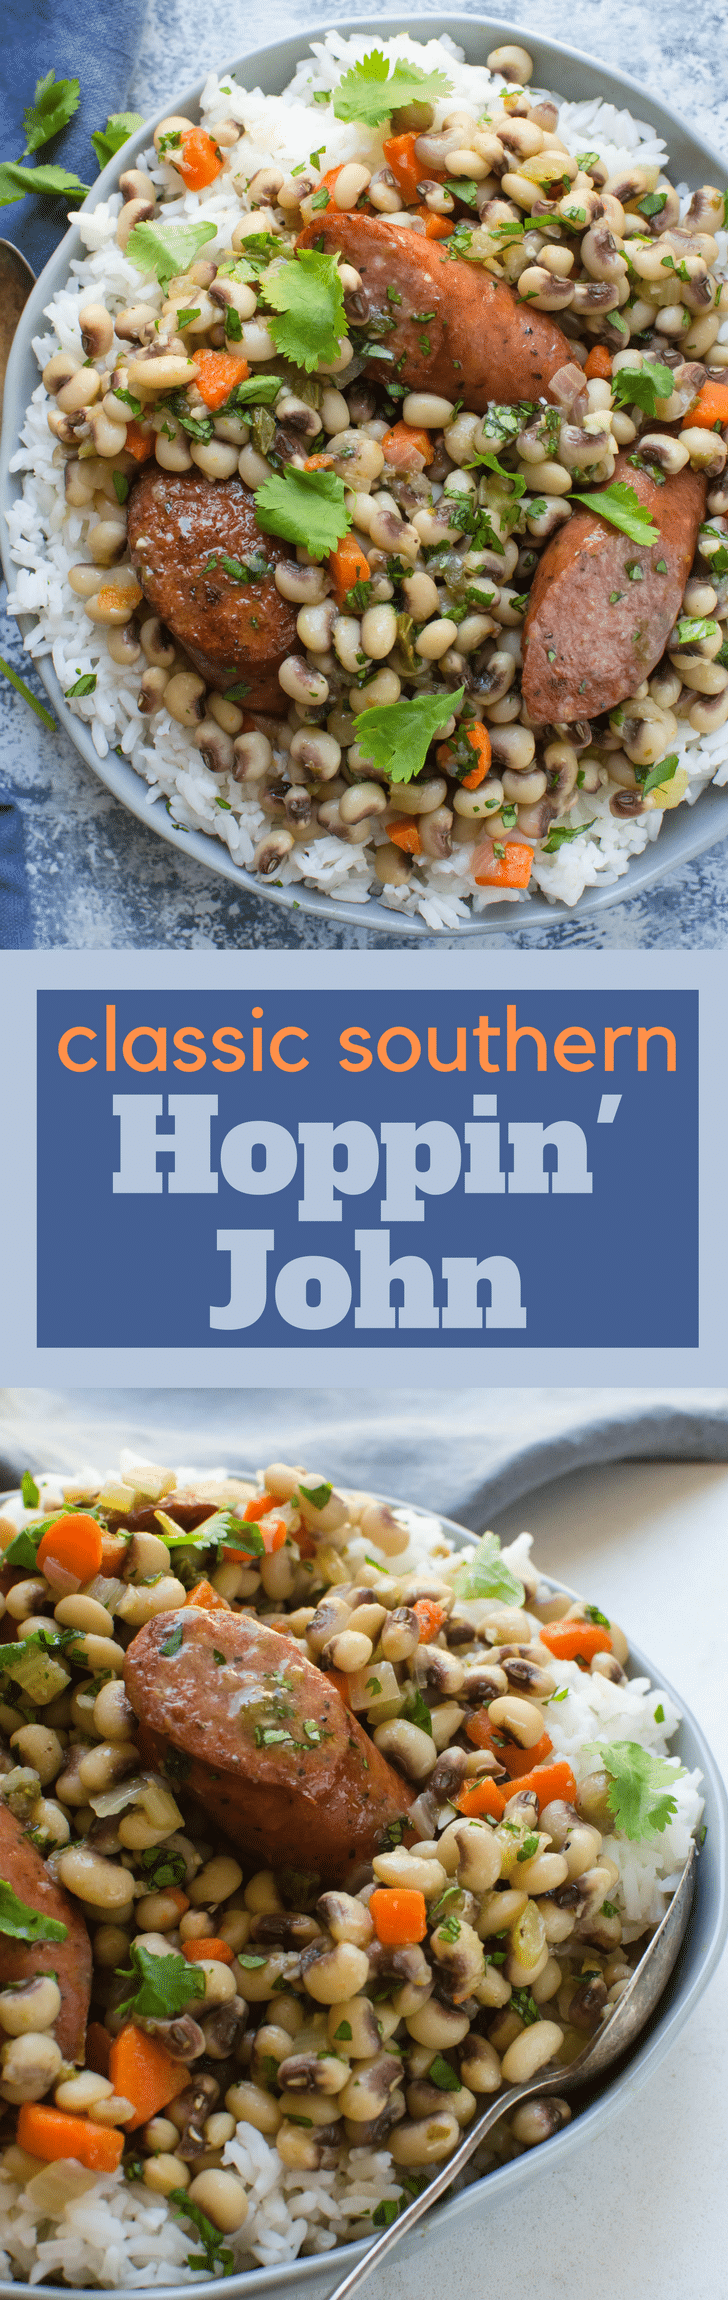 Hoppin' John is a classic New Years Day recipe that's is easy to make and ready in under an hour! Serve with rice for luck and money all year long according to Southern lore. This is the best black eyed pea recipe! #blackeyedpeas #homemadeblackeyedpeas #hoppinjohn #newyearsdayrecipes #newyearsday #legumes #beanrecipes #sausage #kielbasa #rice #onepotmeals